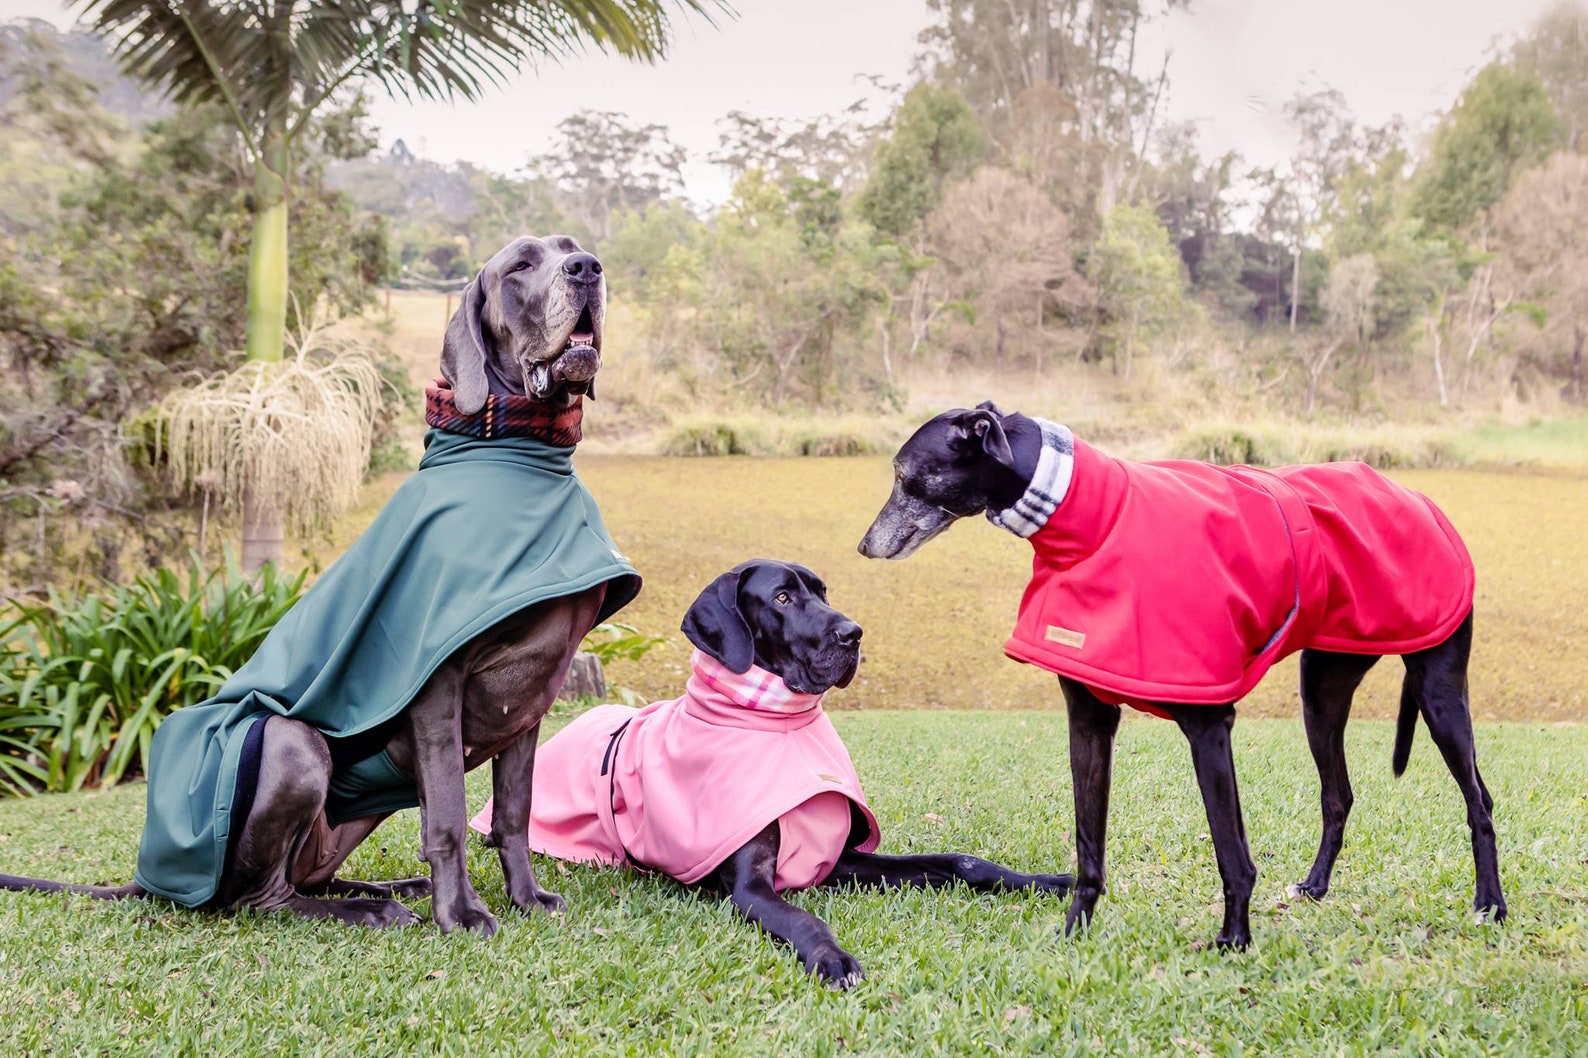 6+ Genius Raincoats For Dogs To Stay Dry In Style